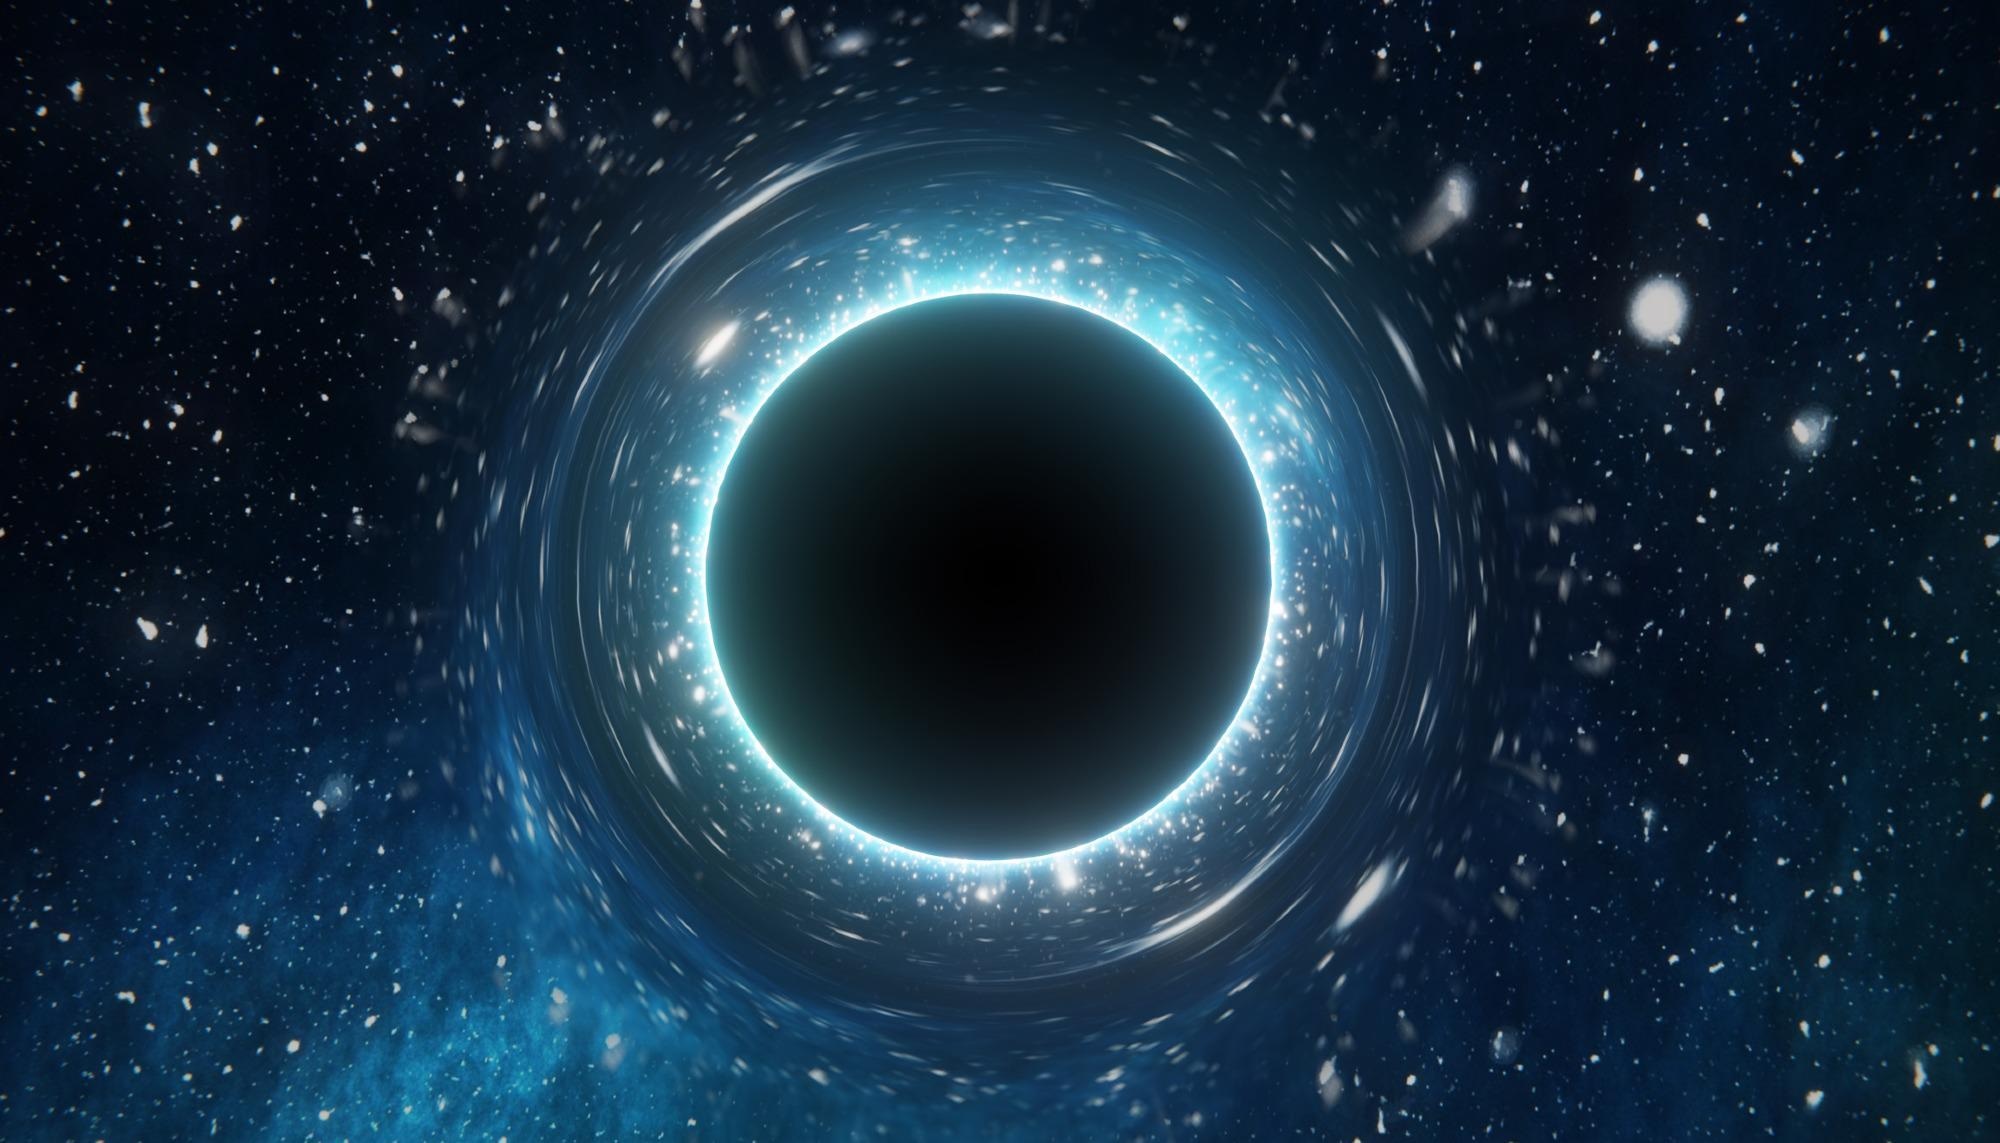 Researchers Examine the Supermassive Structure of Black Holes in the Universe.